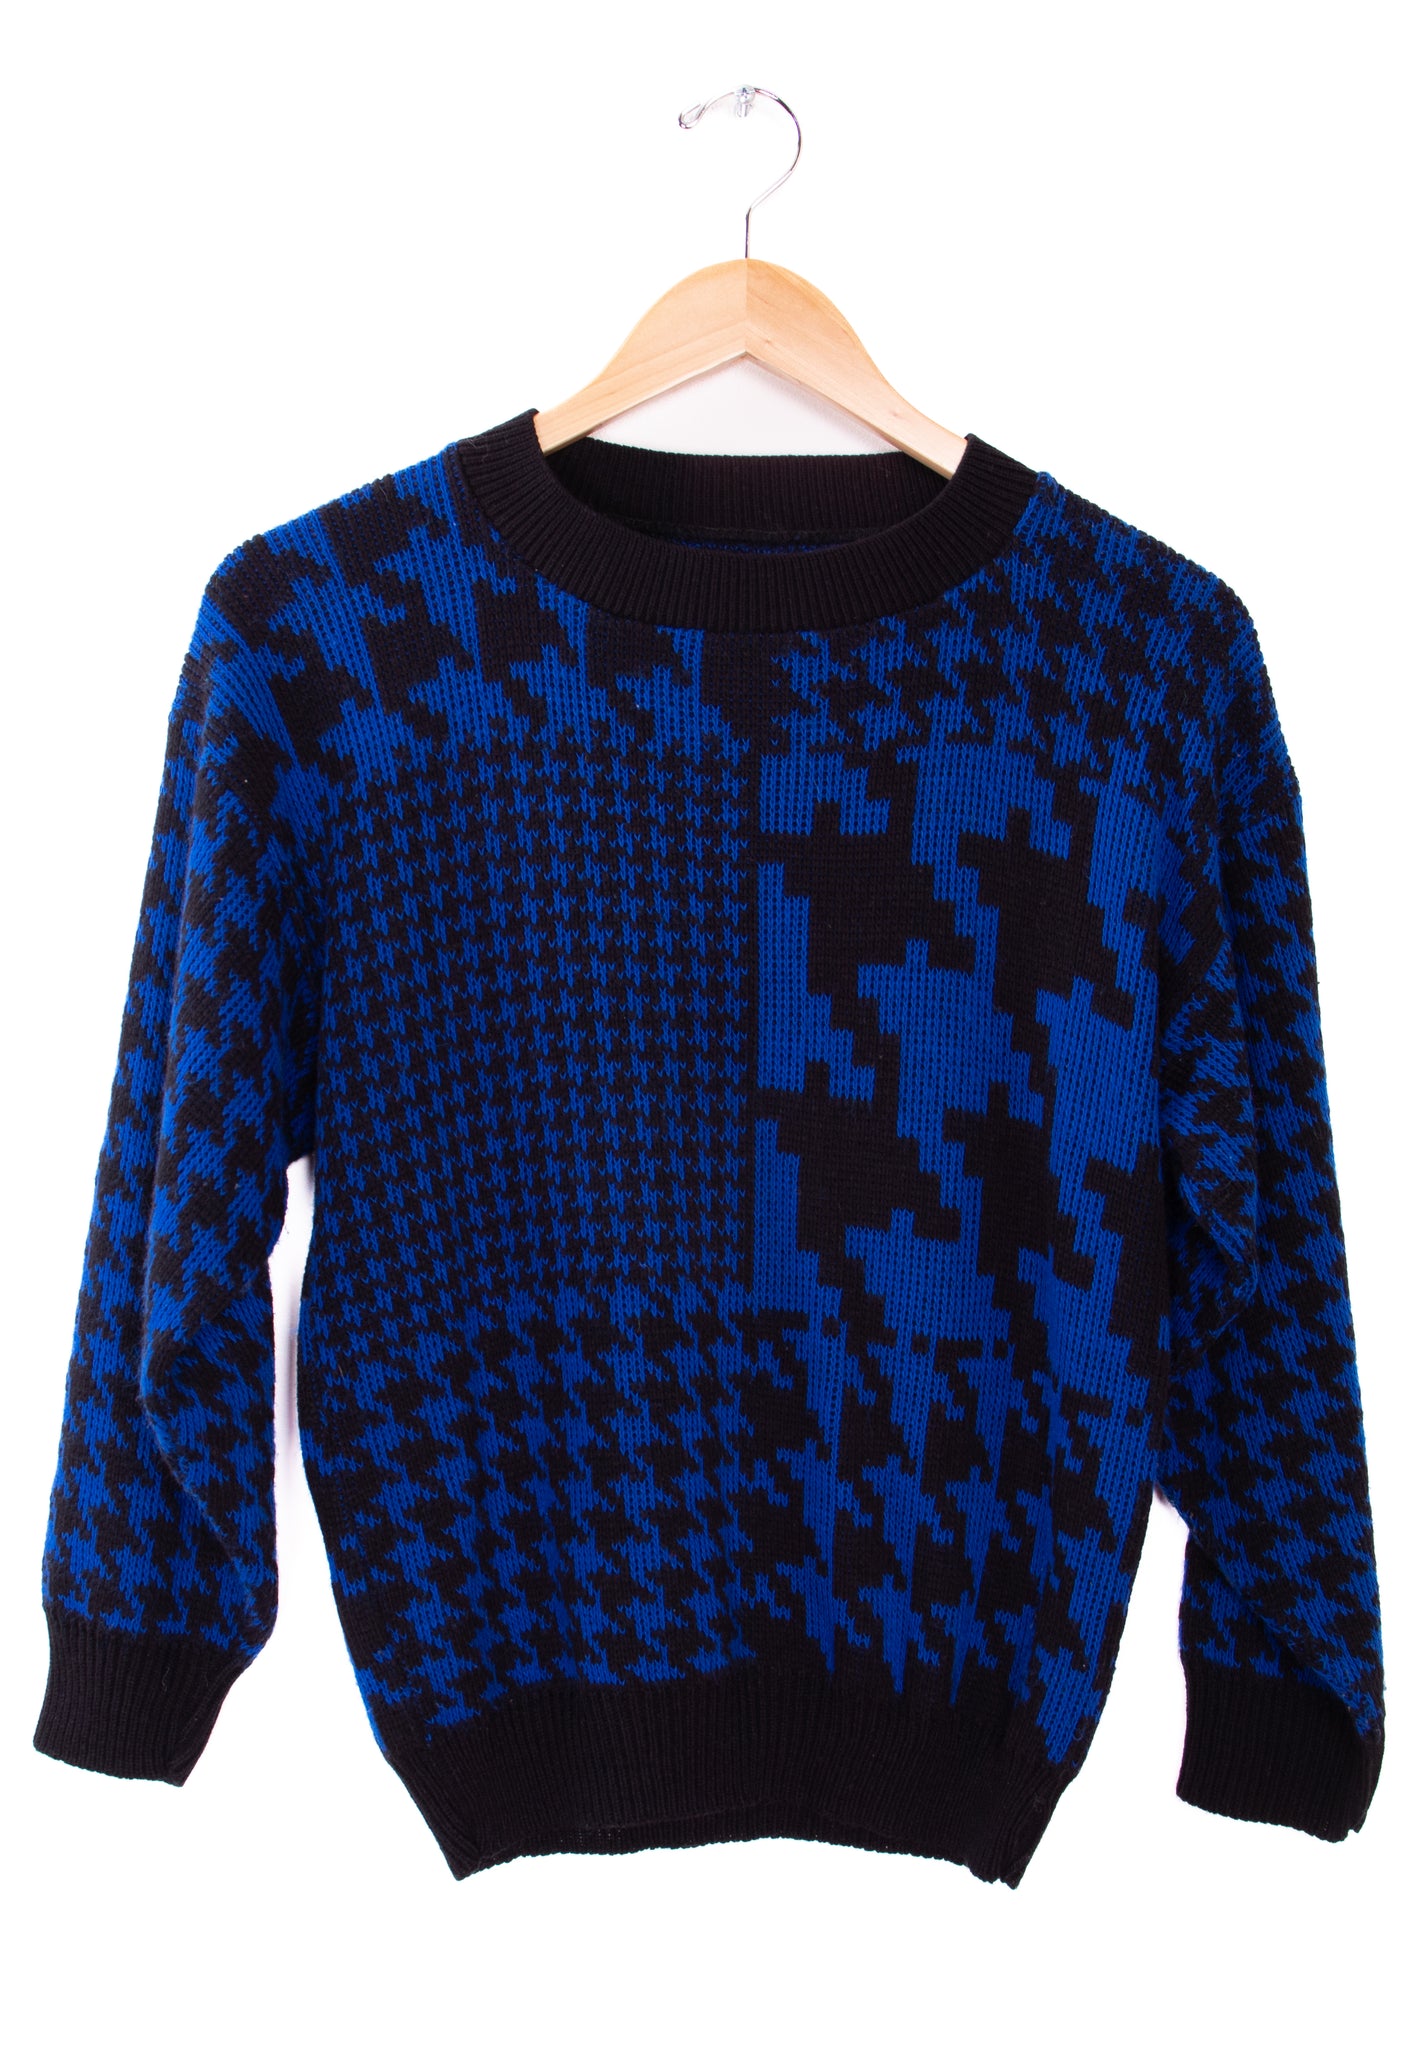 Houndstooth Black and Blue Sweater